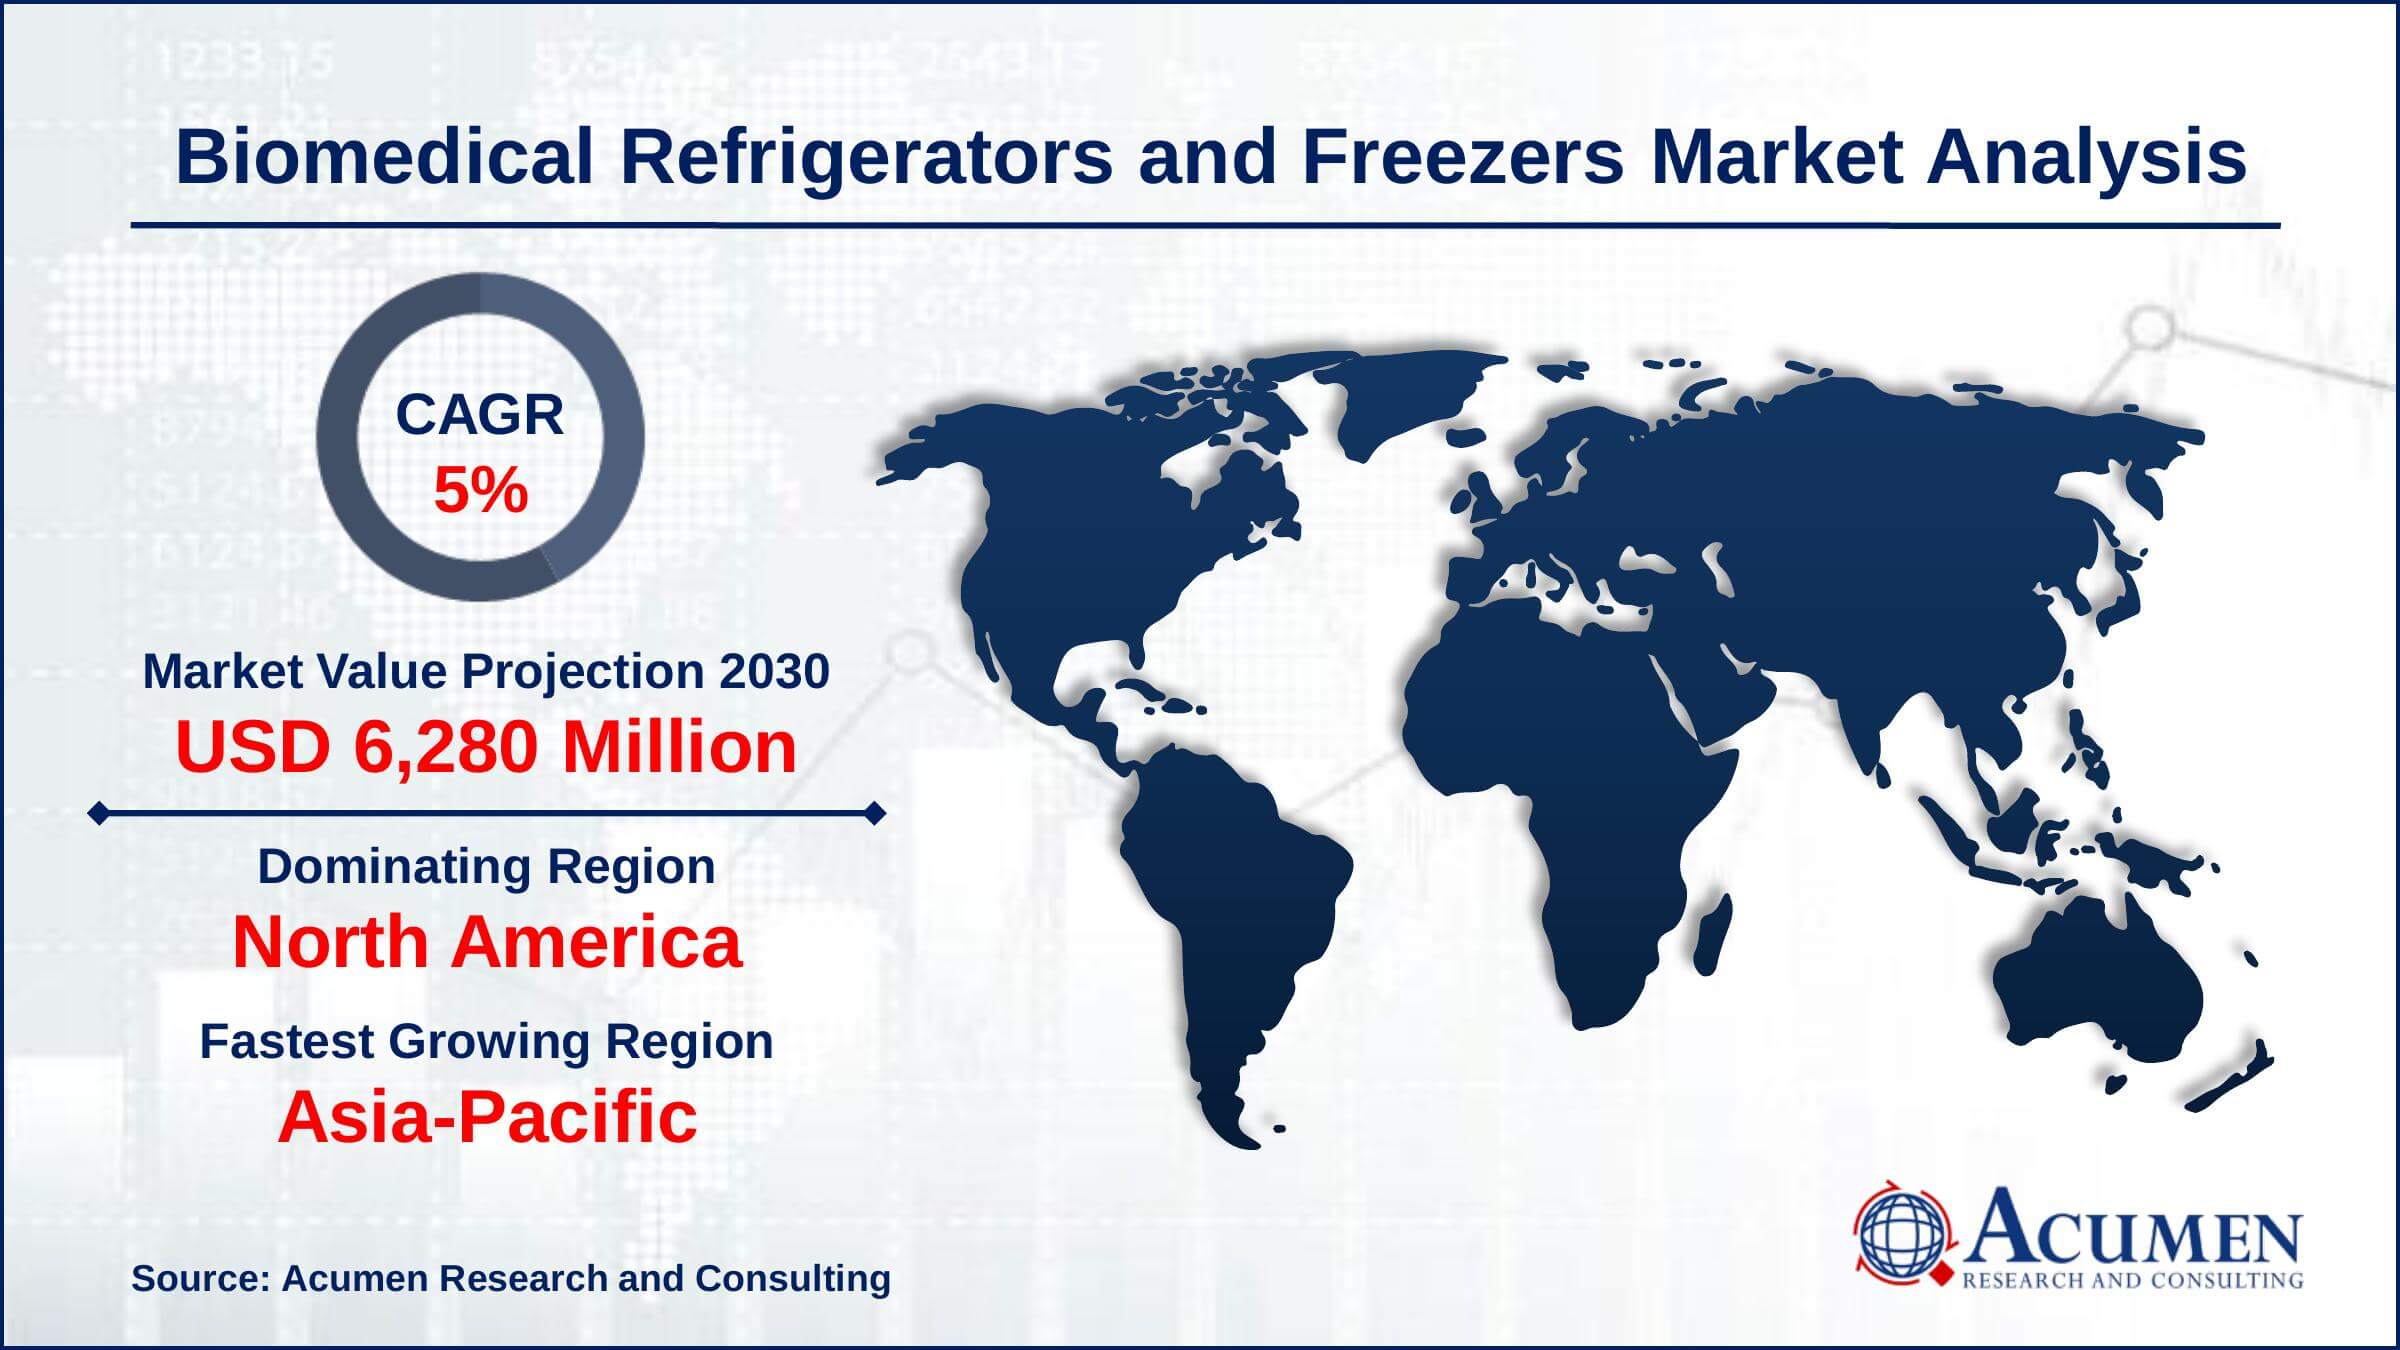 Asia-Pacific Biomedical refrigerators and freezers market growth will observe highest CAGR from 2022 to 2030